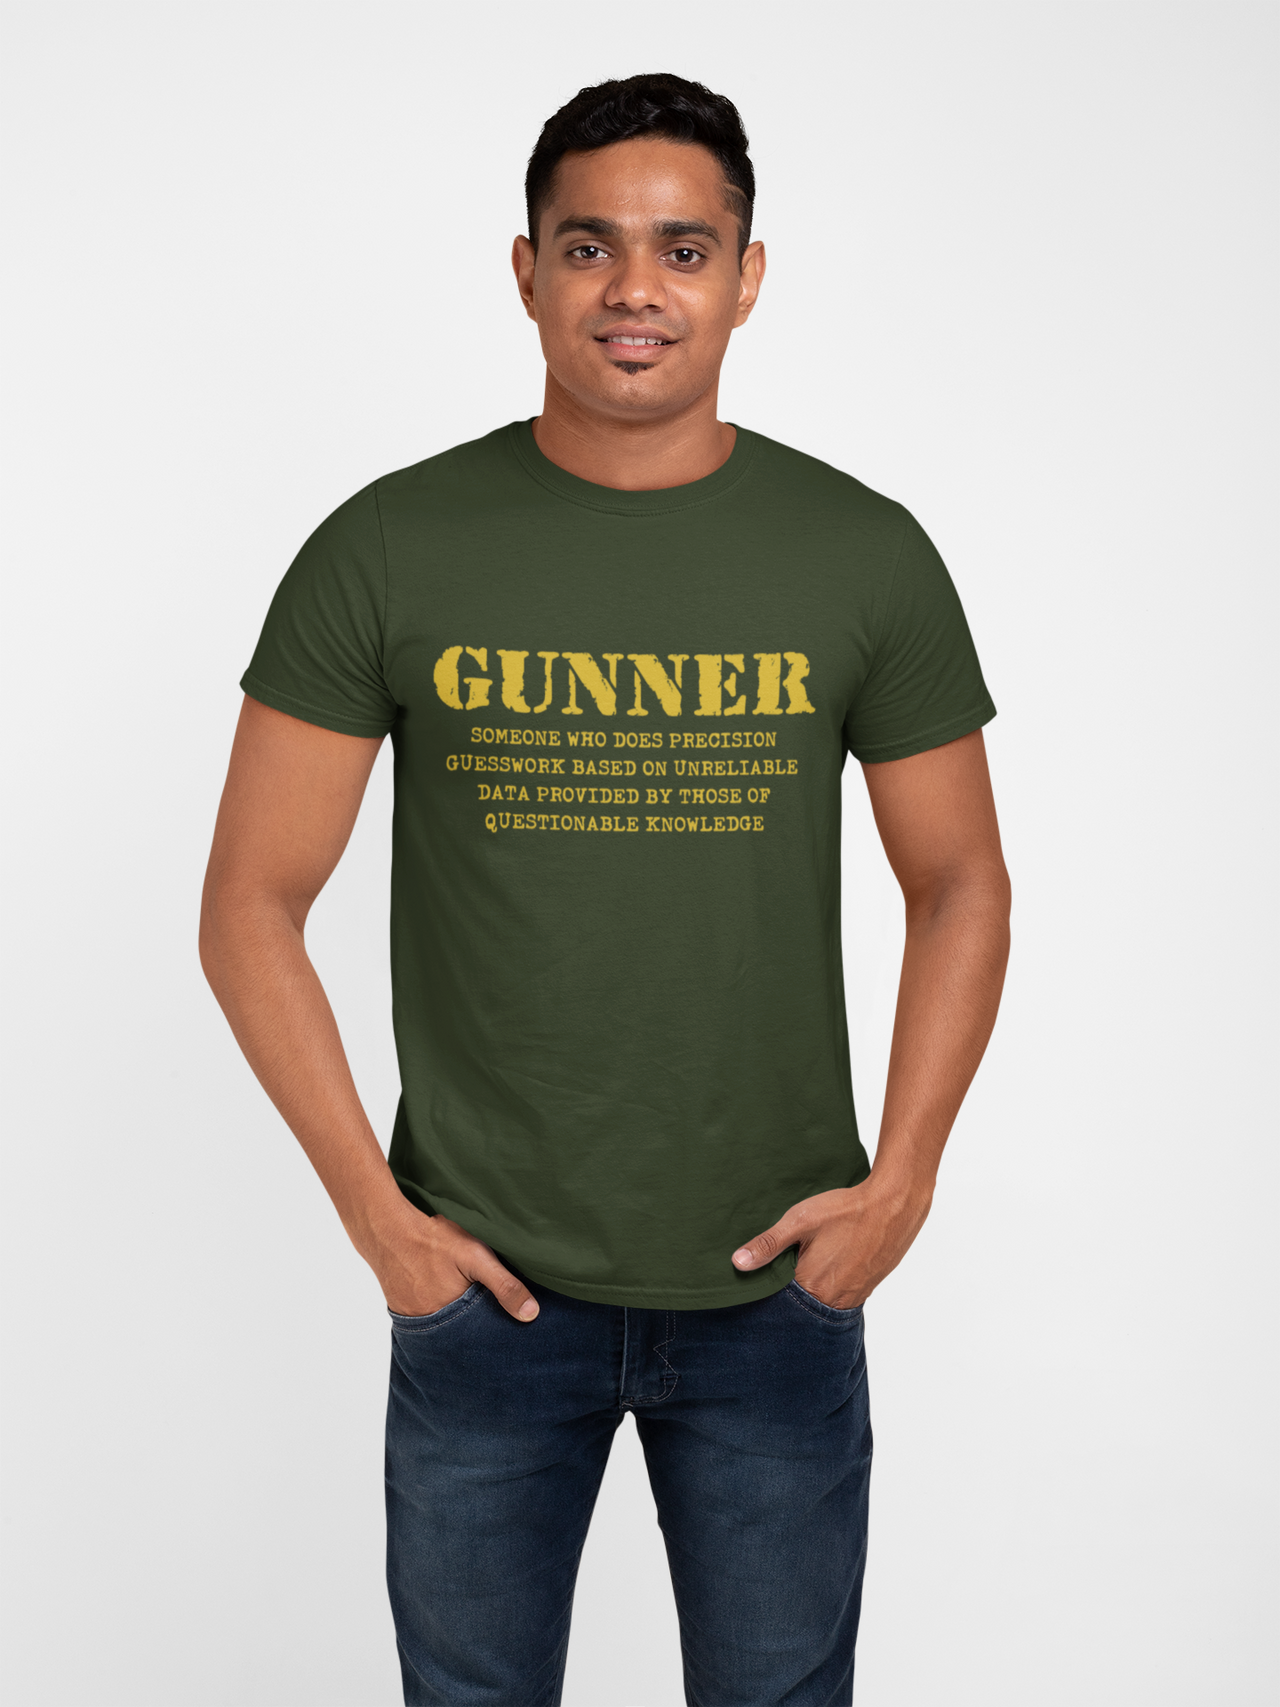 Gunner T-shirt - Someone Who Does Precision Guesswork.....(Men)